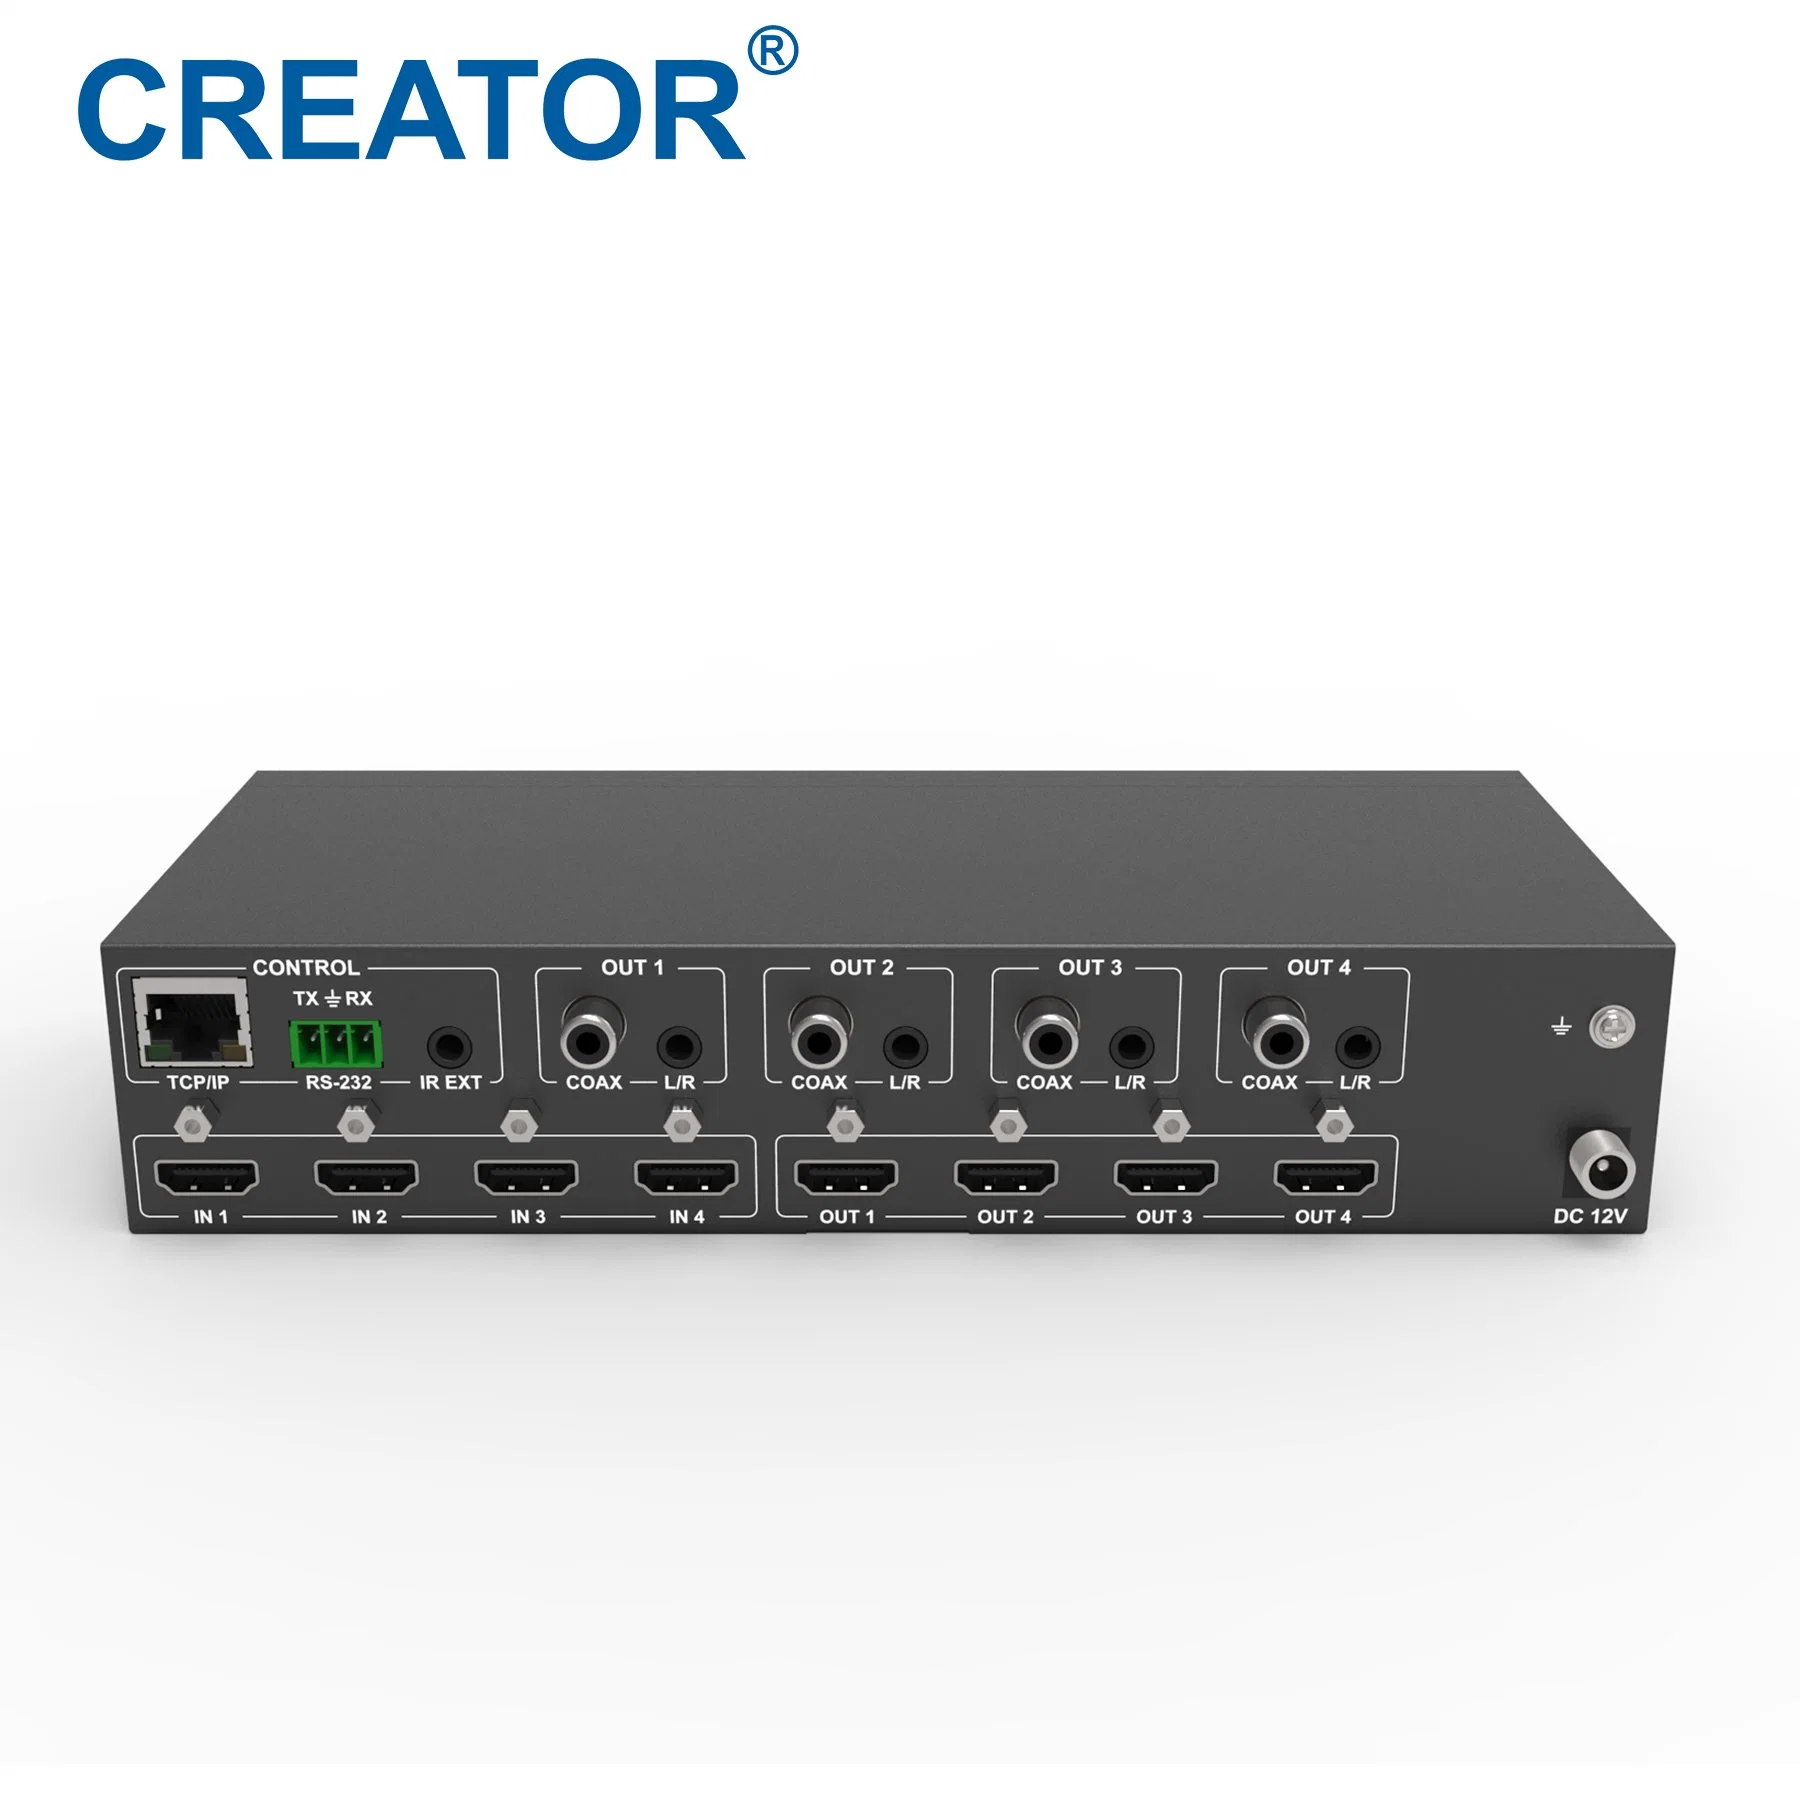 4K HDMI 4X4 Matrix Supports 18gbps Transmission Rate